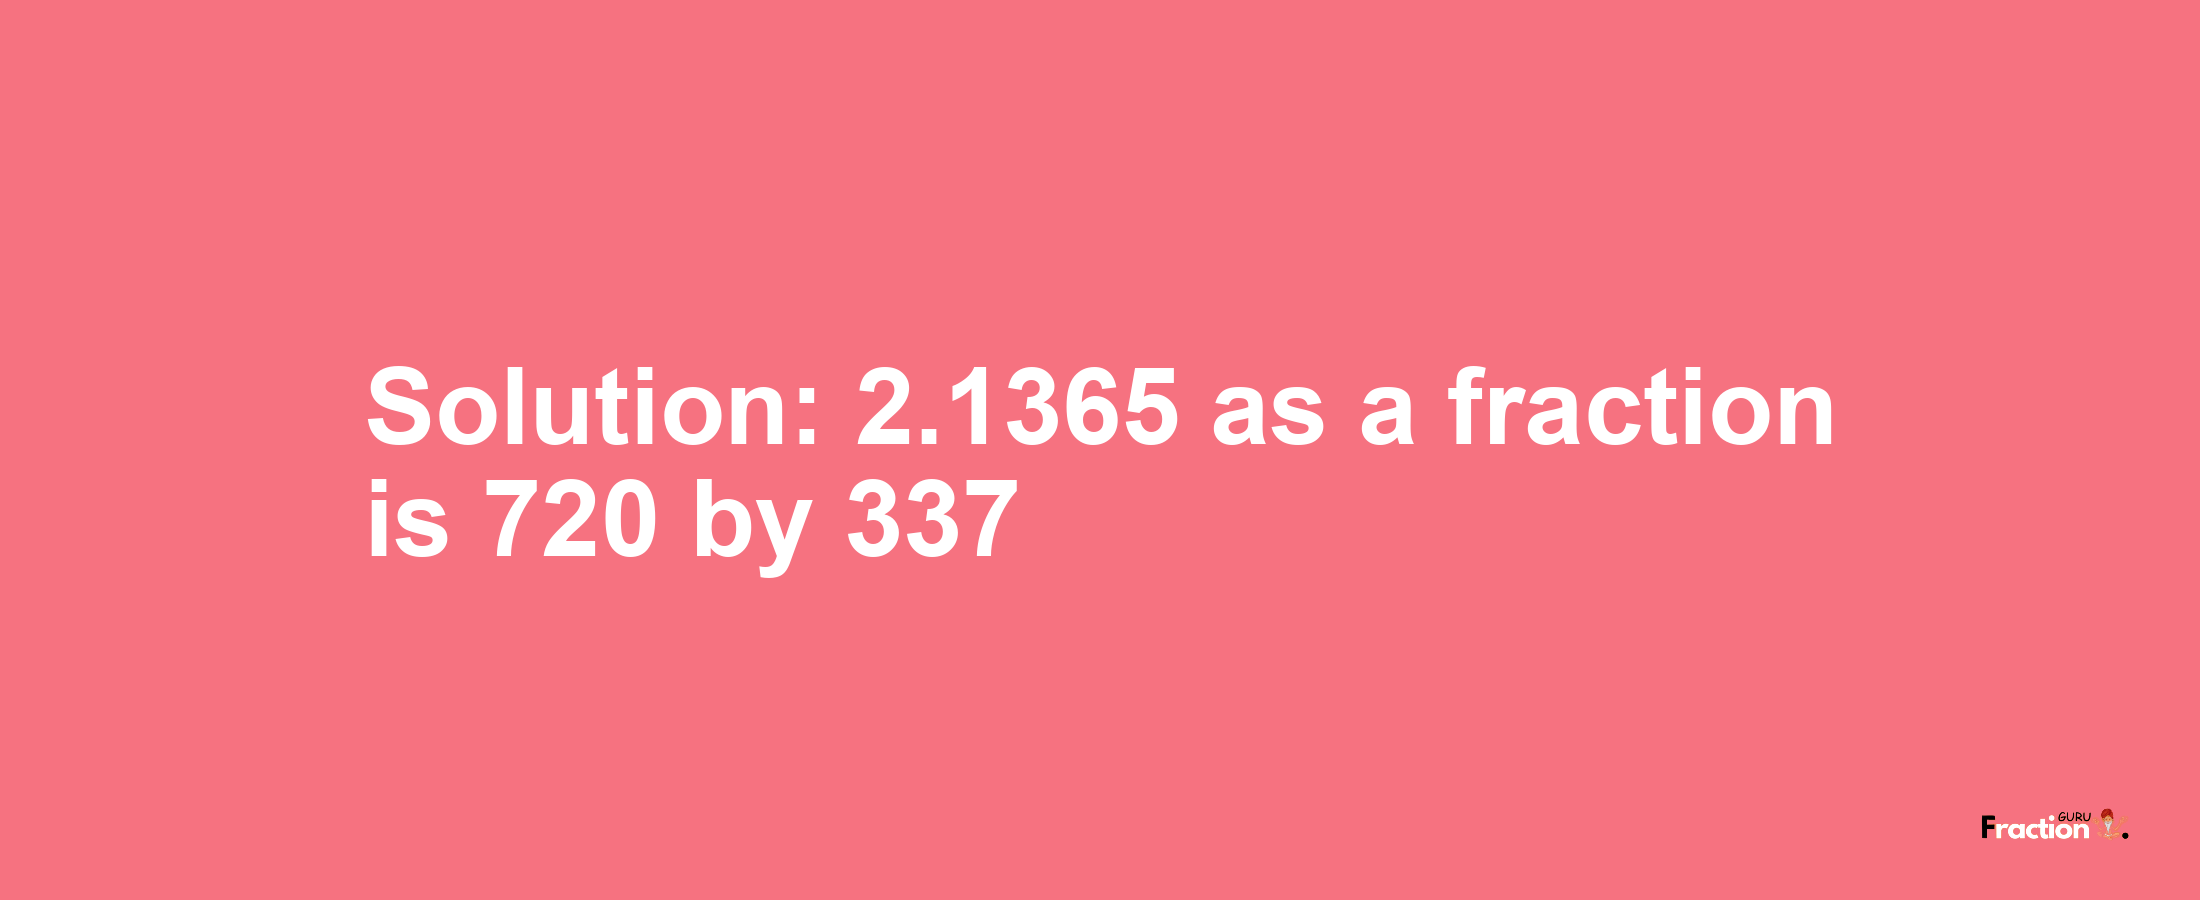 Solution:2.1365 as a fraction is 720/337